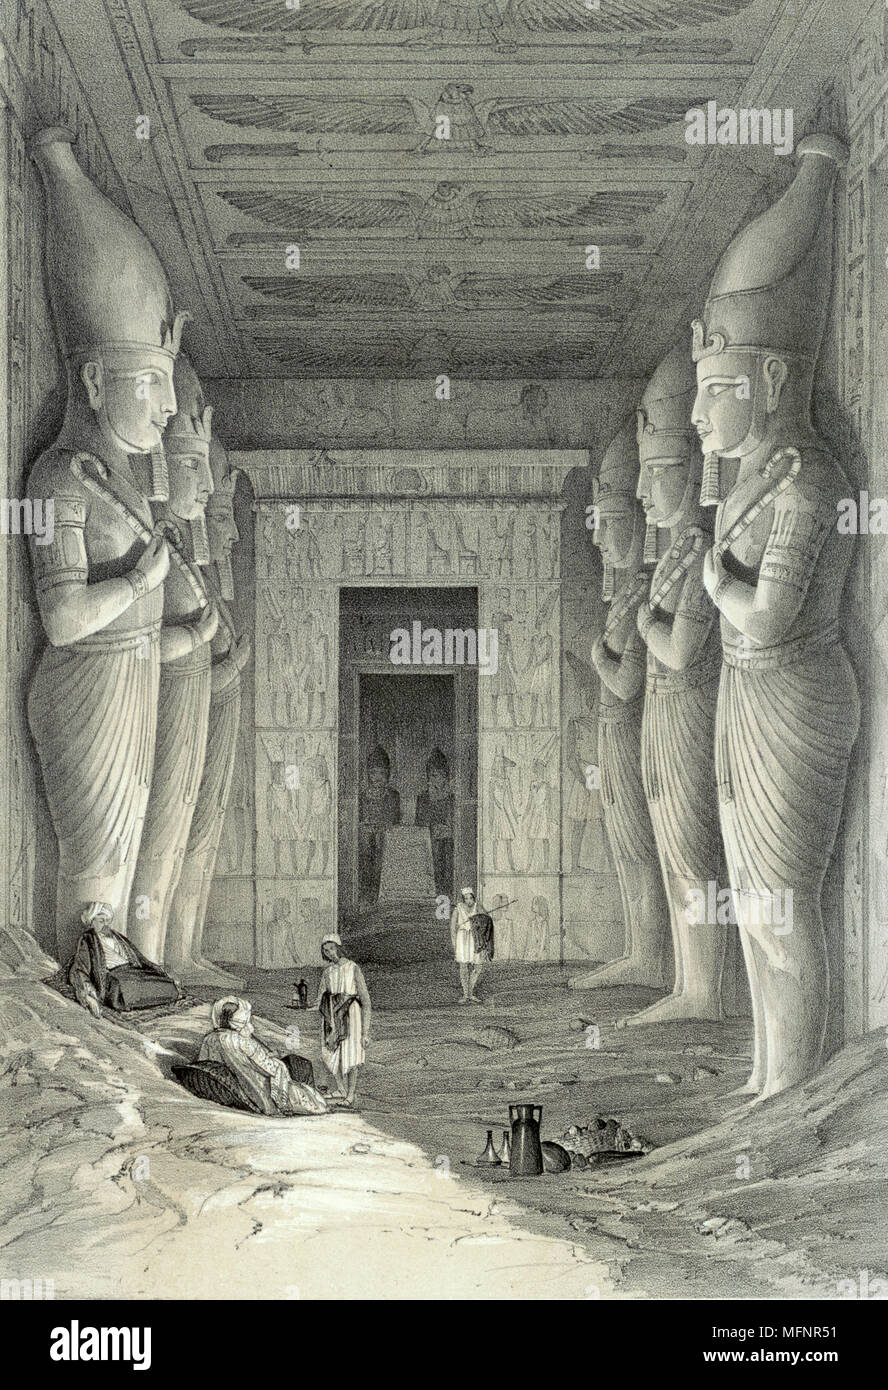 Limestone statues of Ramses II in main temple at Abu Simbel.  Each holds crook and flail, symbols of kingship.   Lithograph after Jules Goury (1803-1834) French Architect. Archaeology Religion Mythology Ancient Egyptian Stock Photo